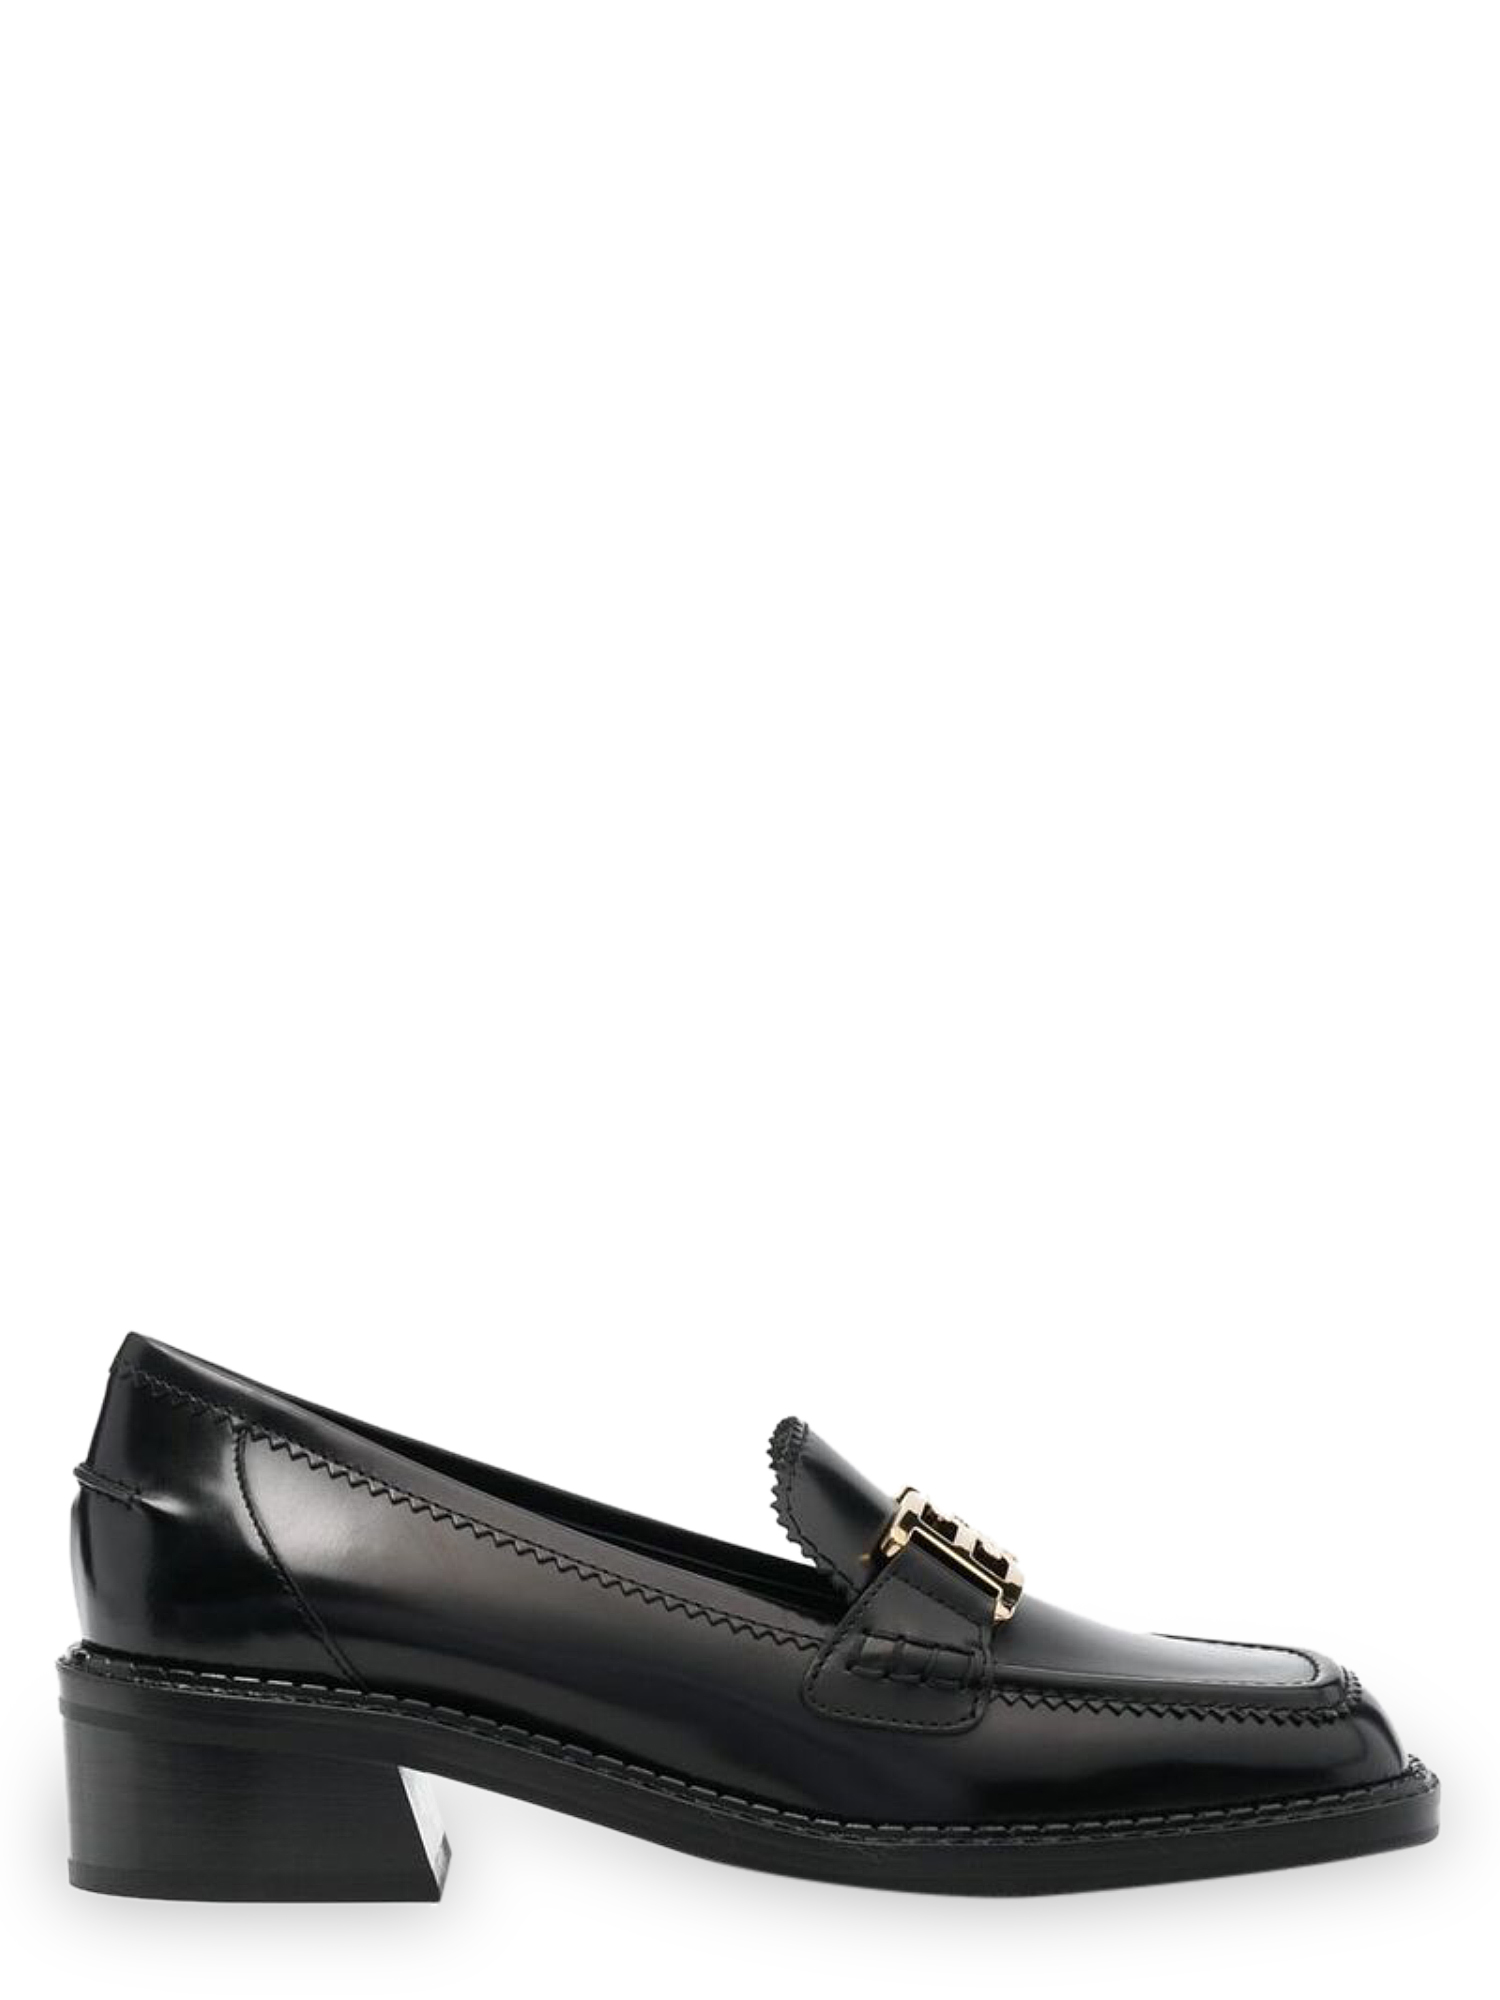 BALLY WOMEN'S LOAFERS - BALLY - IN BLACK LEATHER